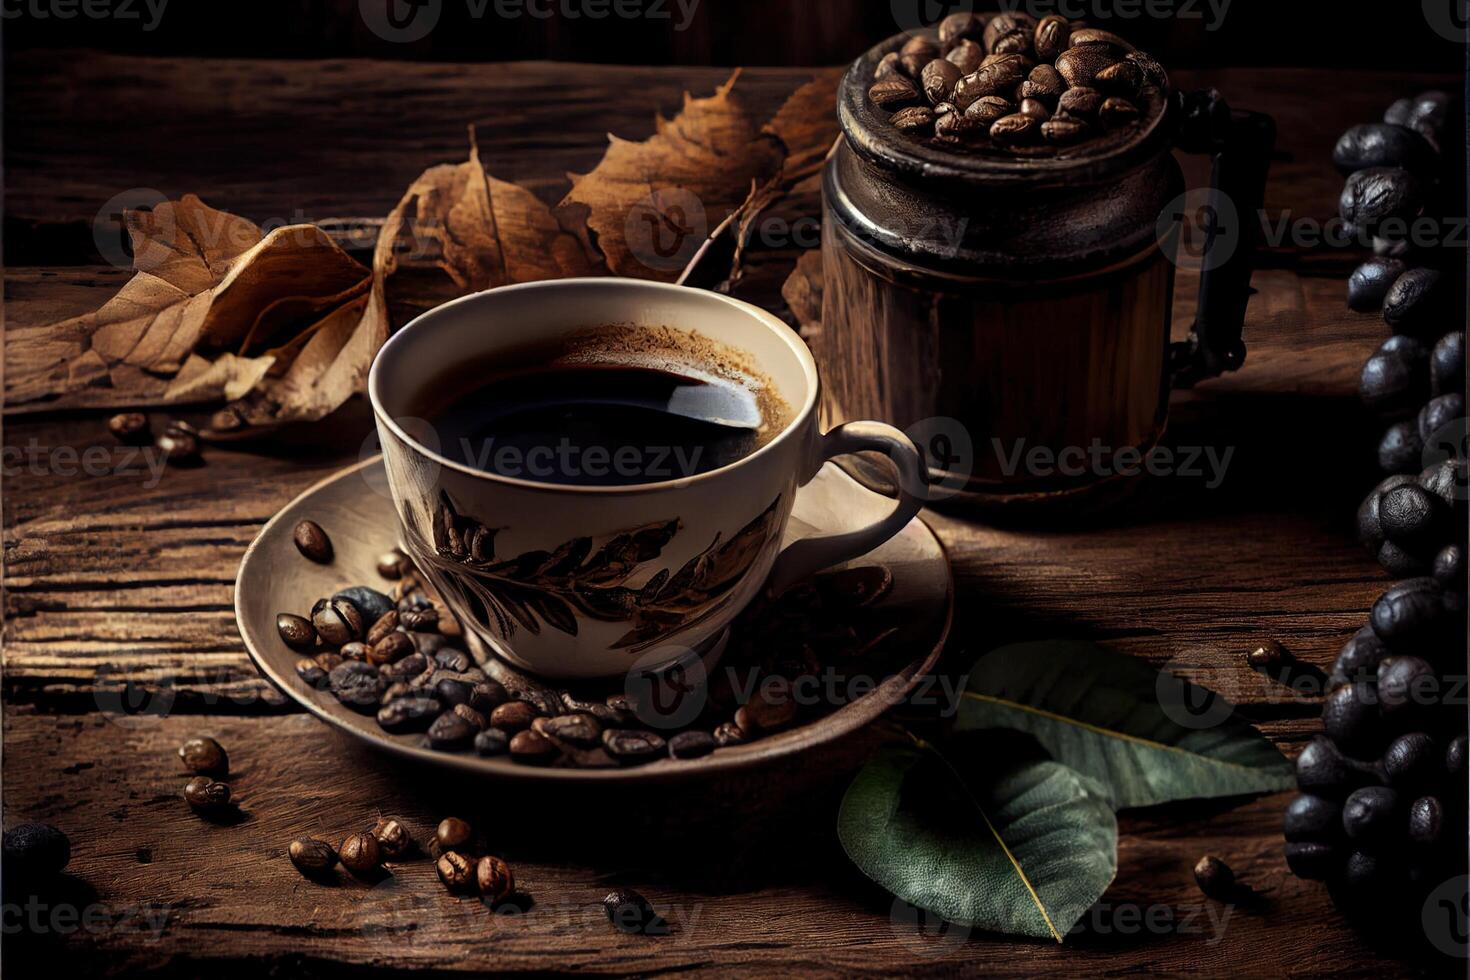 illustration of Cup of coffee and coffee beans on old wooden table and the plantations tea hill background photo